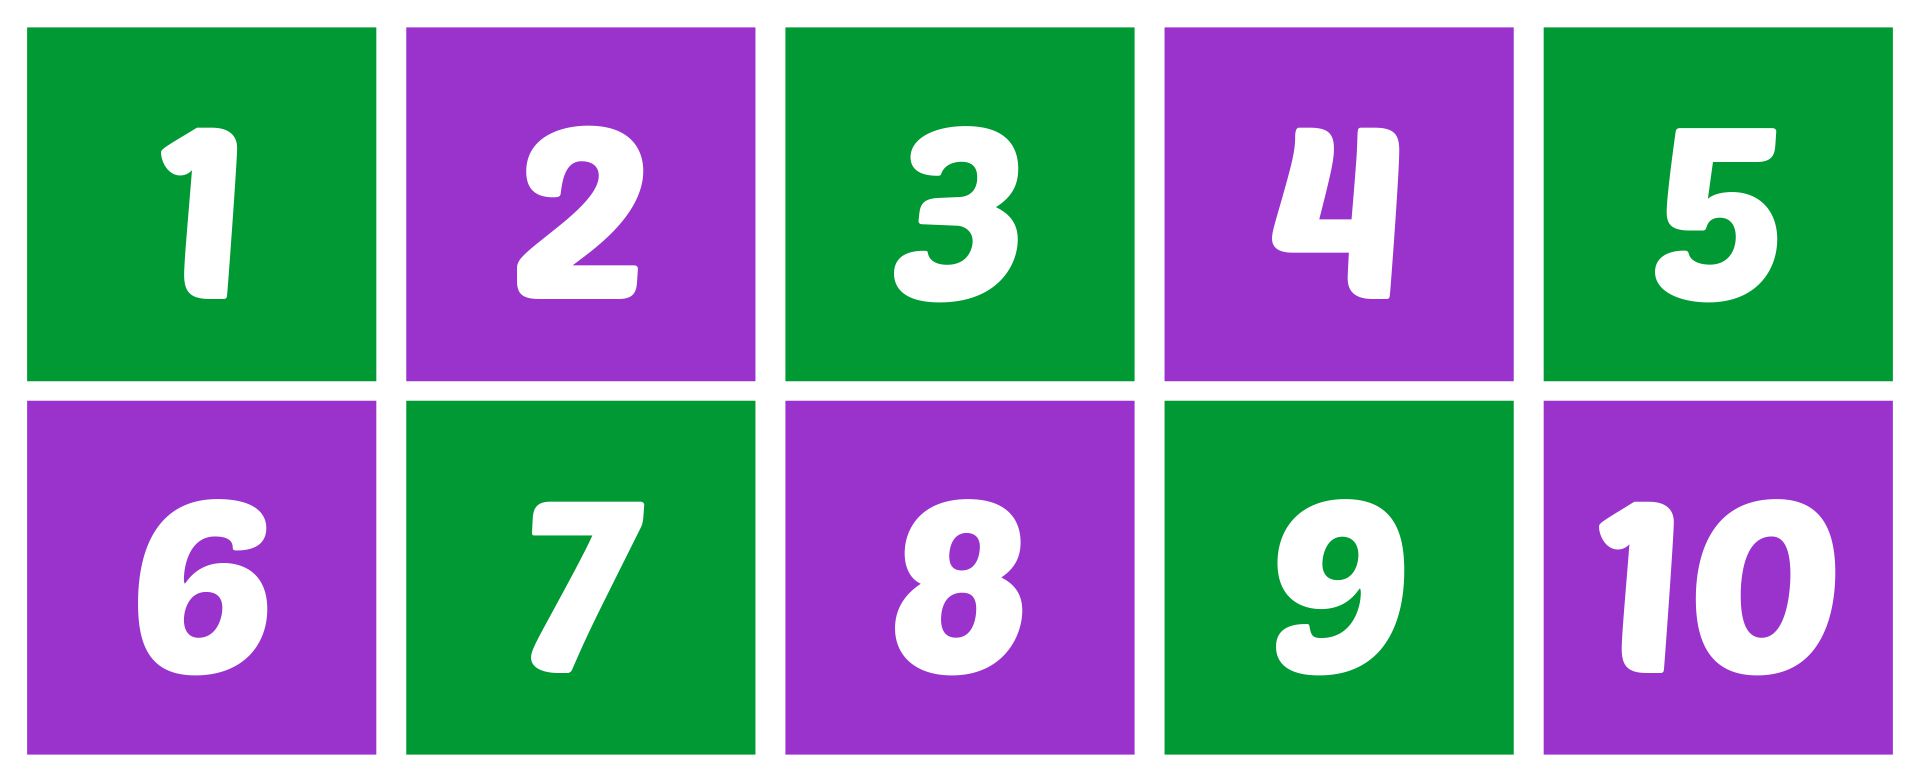 8-best-images-of-large-printable-numbers-1-30-free-printable-numbers-1-30-printable-number